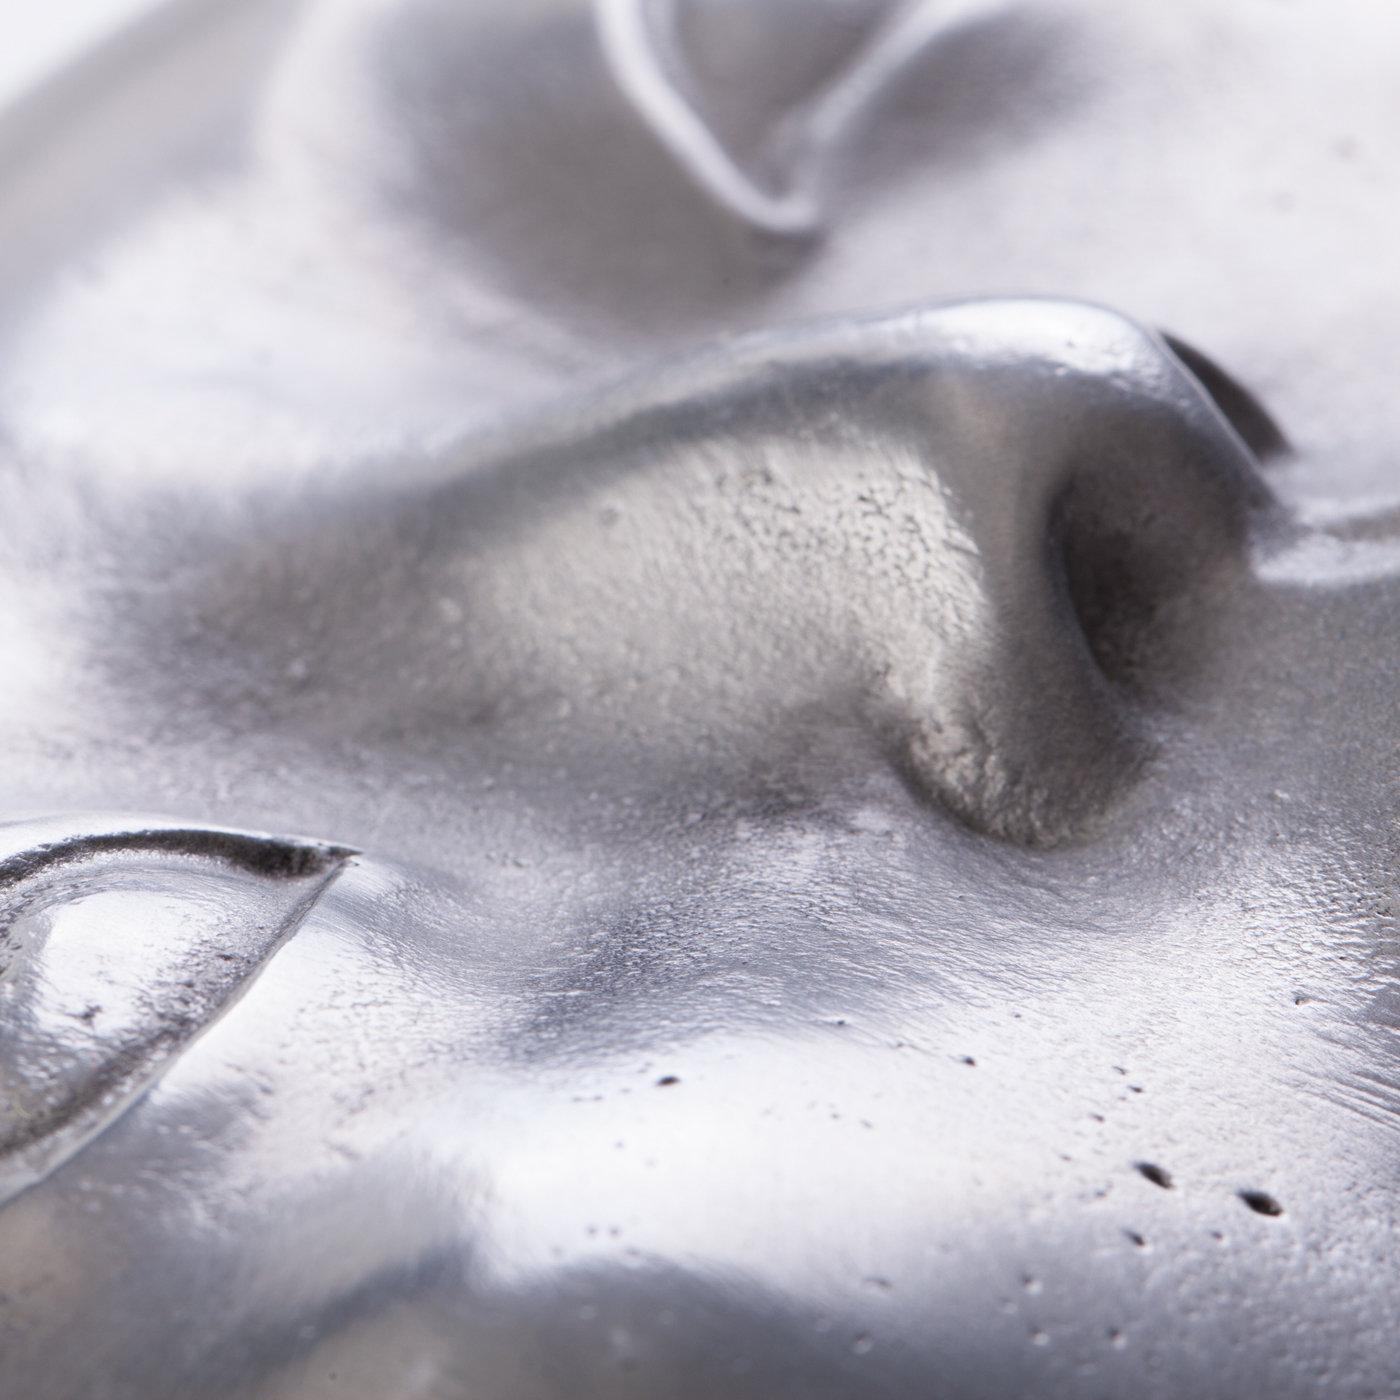 An oversized pill with a human face takes the form of a rhino. Hand-cast in melted aluminum and polished to a glazed finish.